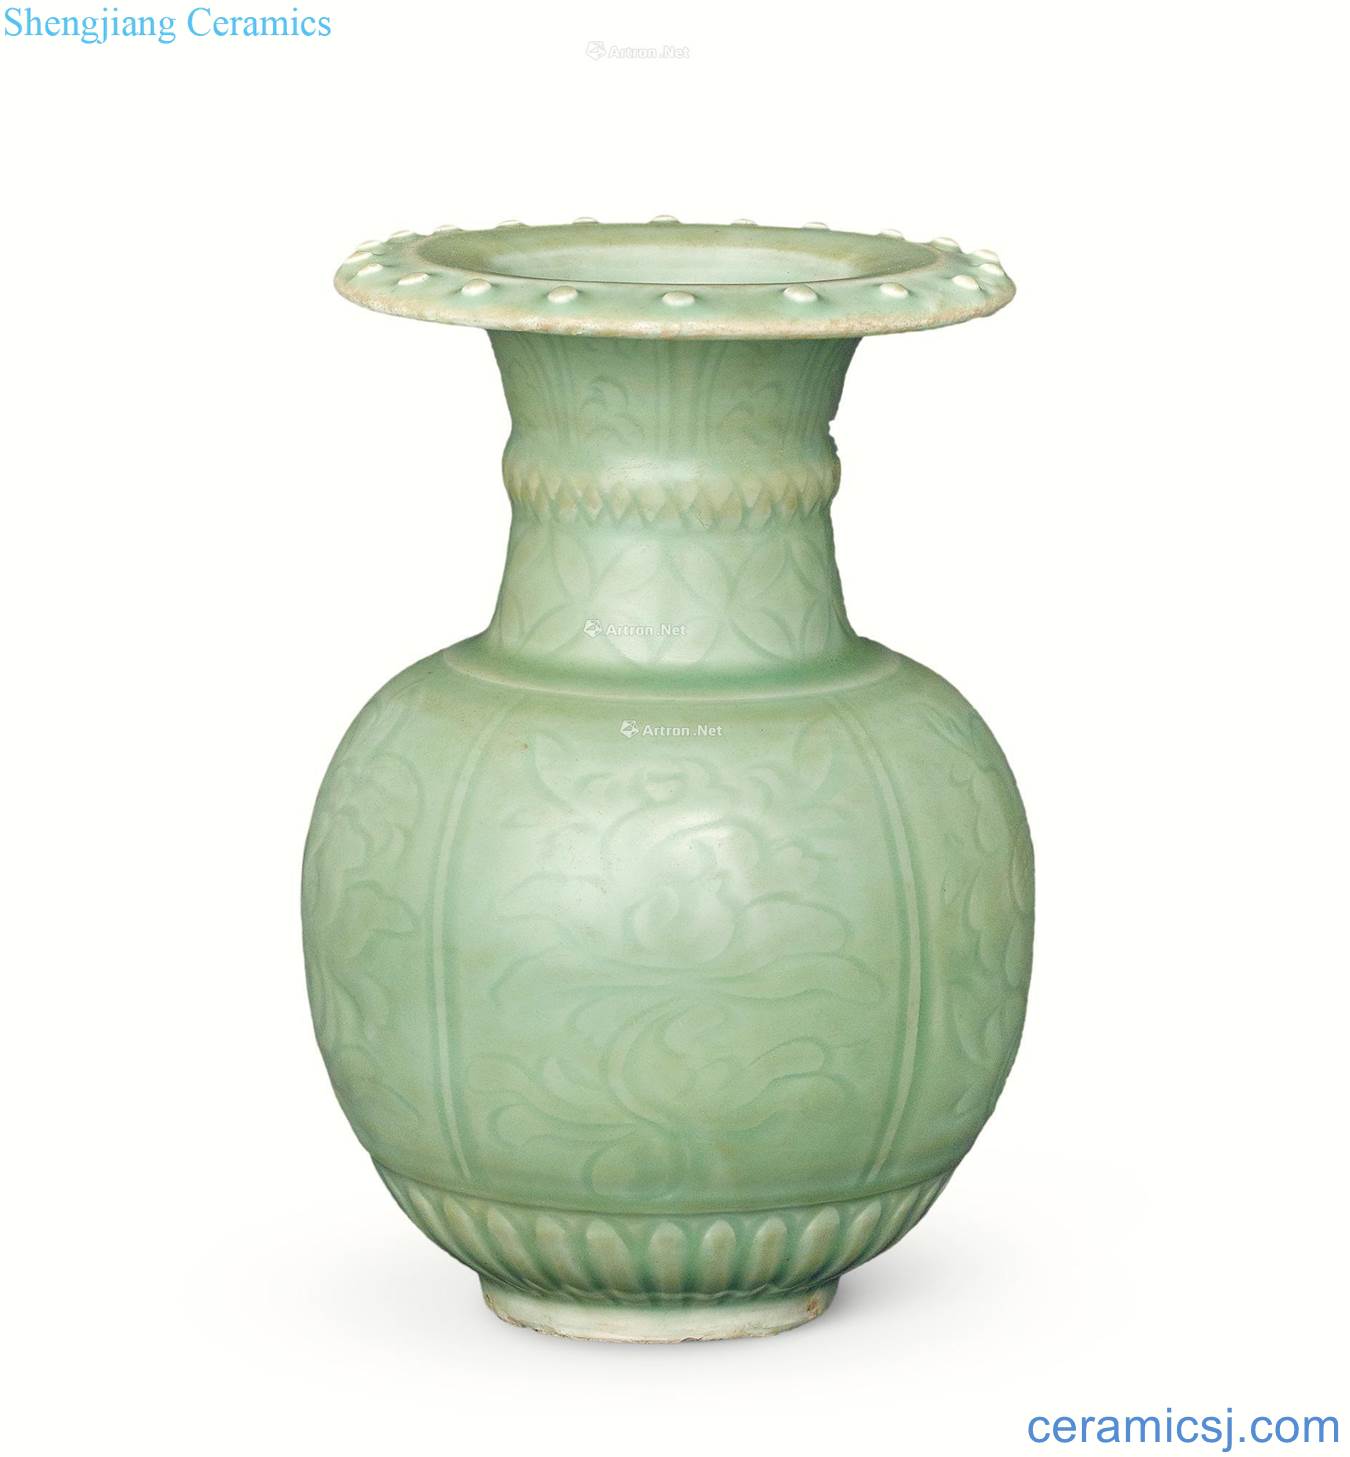 In the Ming dynasty Longquan celadon dark hand-cut pomegranate bottles